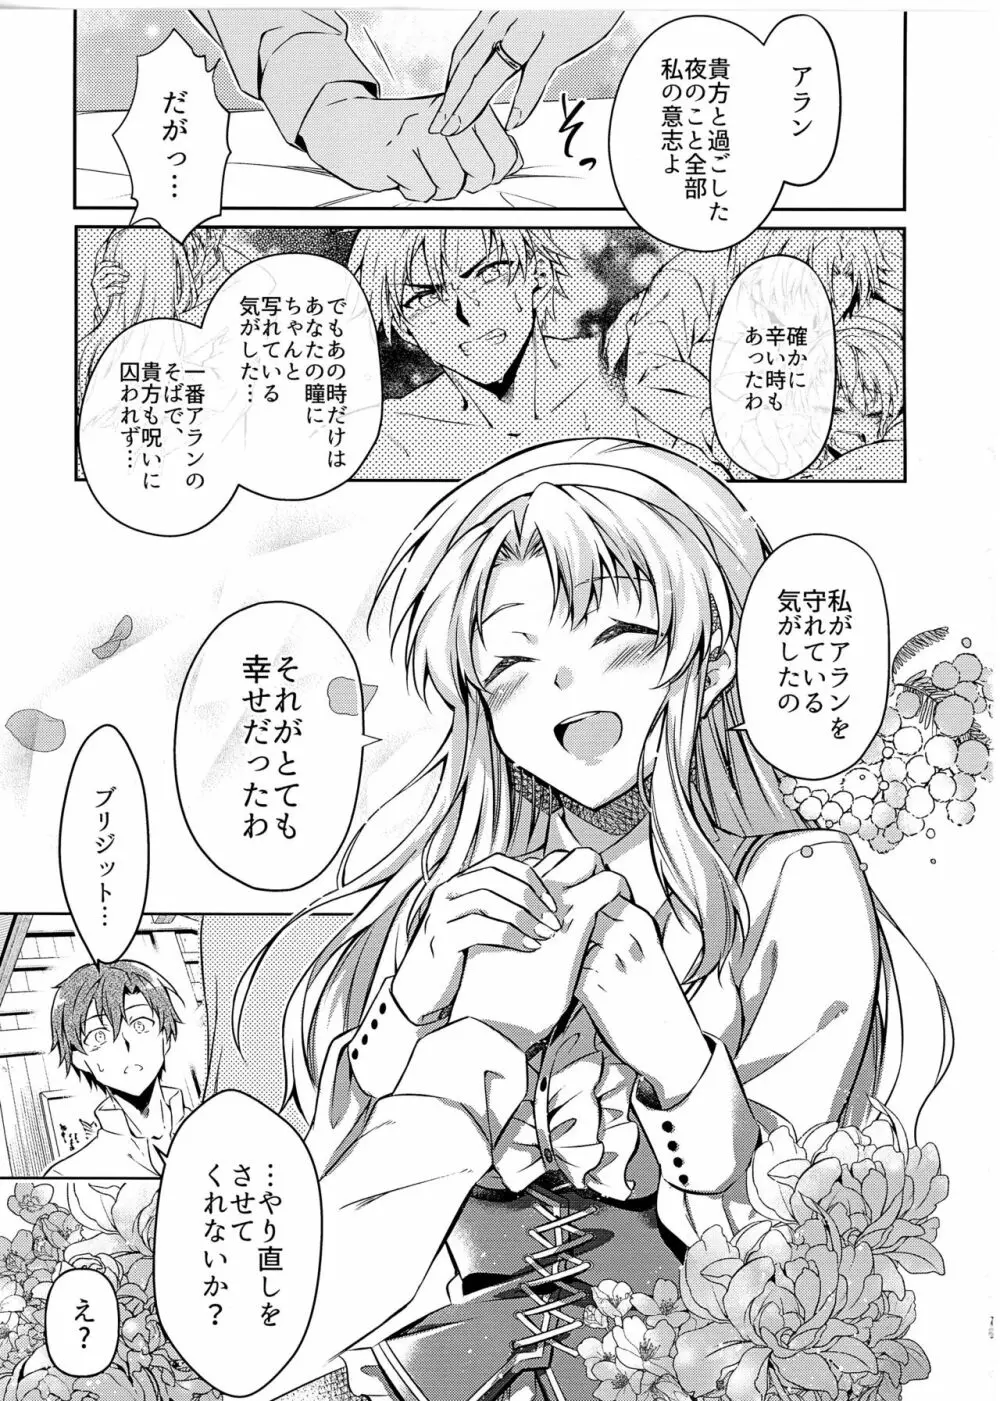 Affection & Blessing～アランとブリジット～ - page17